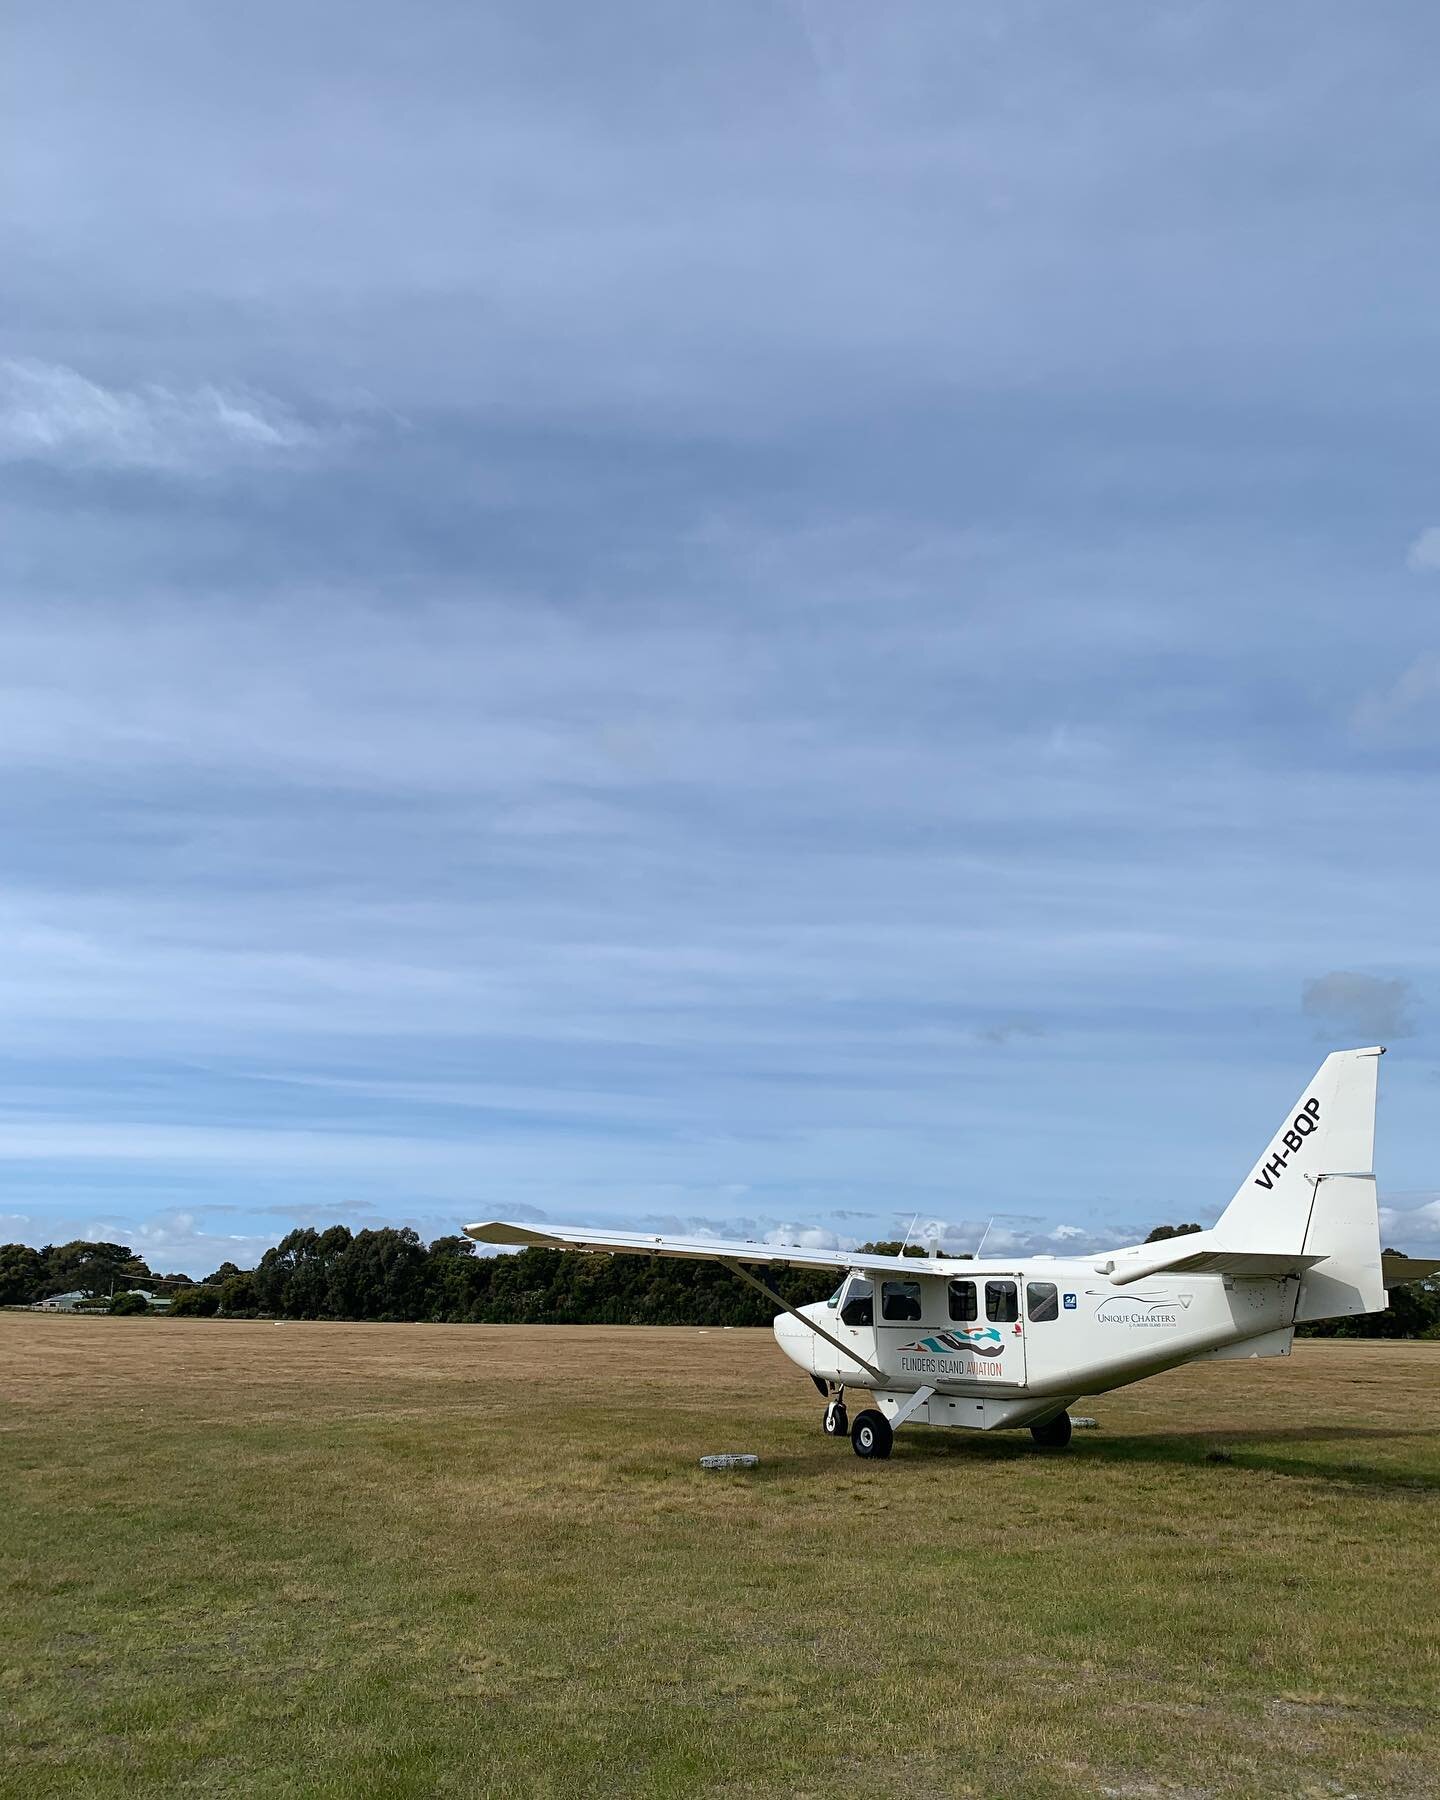 Happy Friday from the whole team here at Flinders Island Aviation! For those of you that flew with us, we hope you enjoyed your flight and we can&rsquo;t wait to see you again soon. For those of you who are flying with us next week, we are looking fo